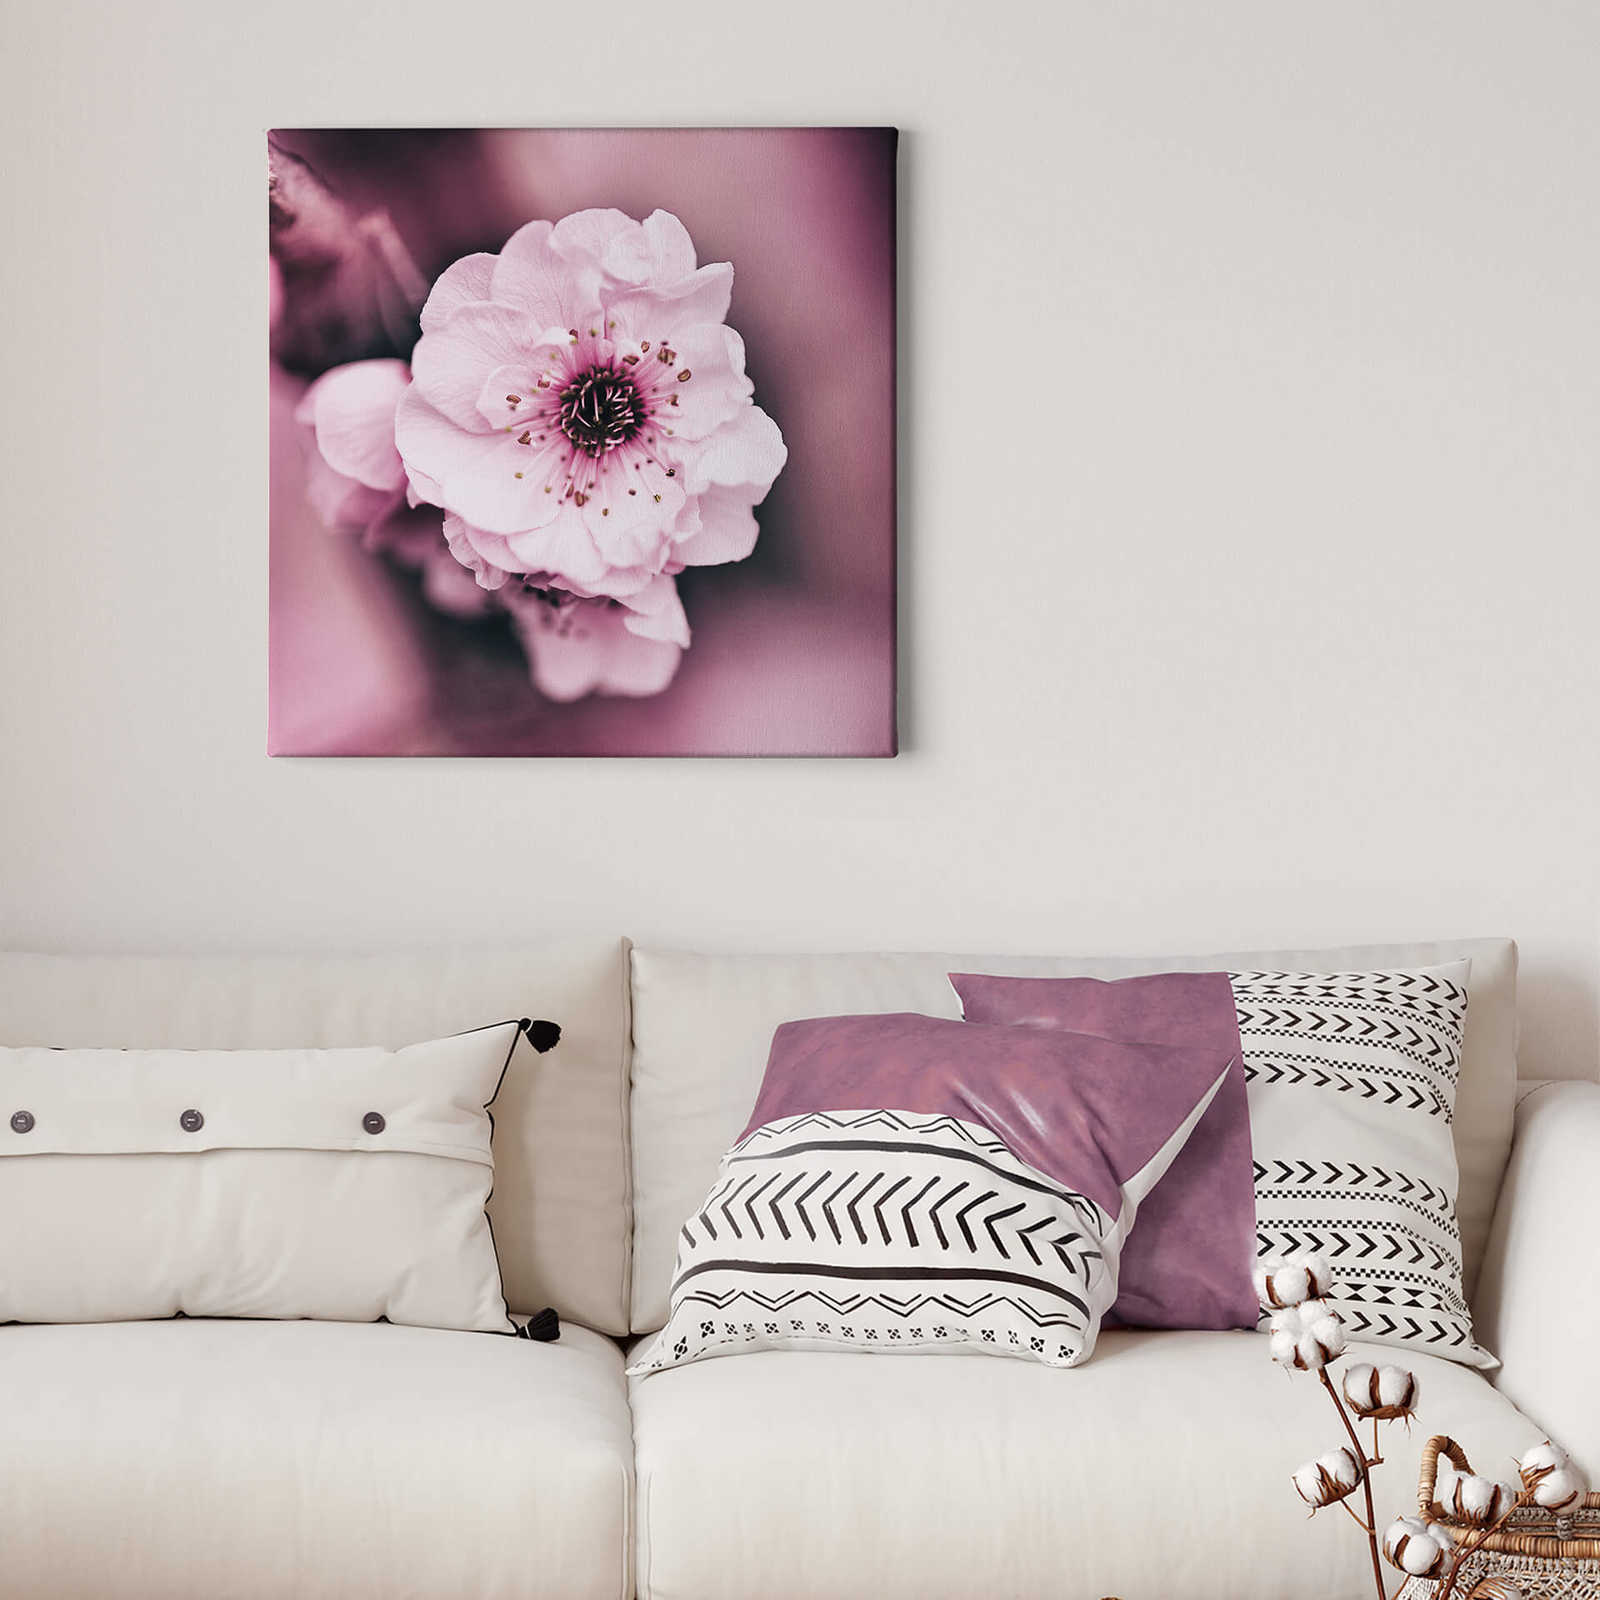             Flowers canvas print pink blossoms detail view
        